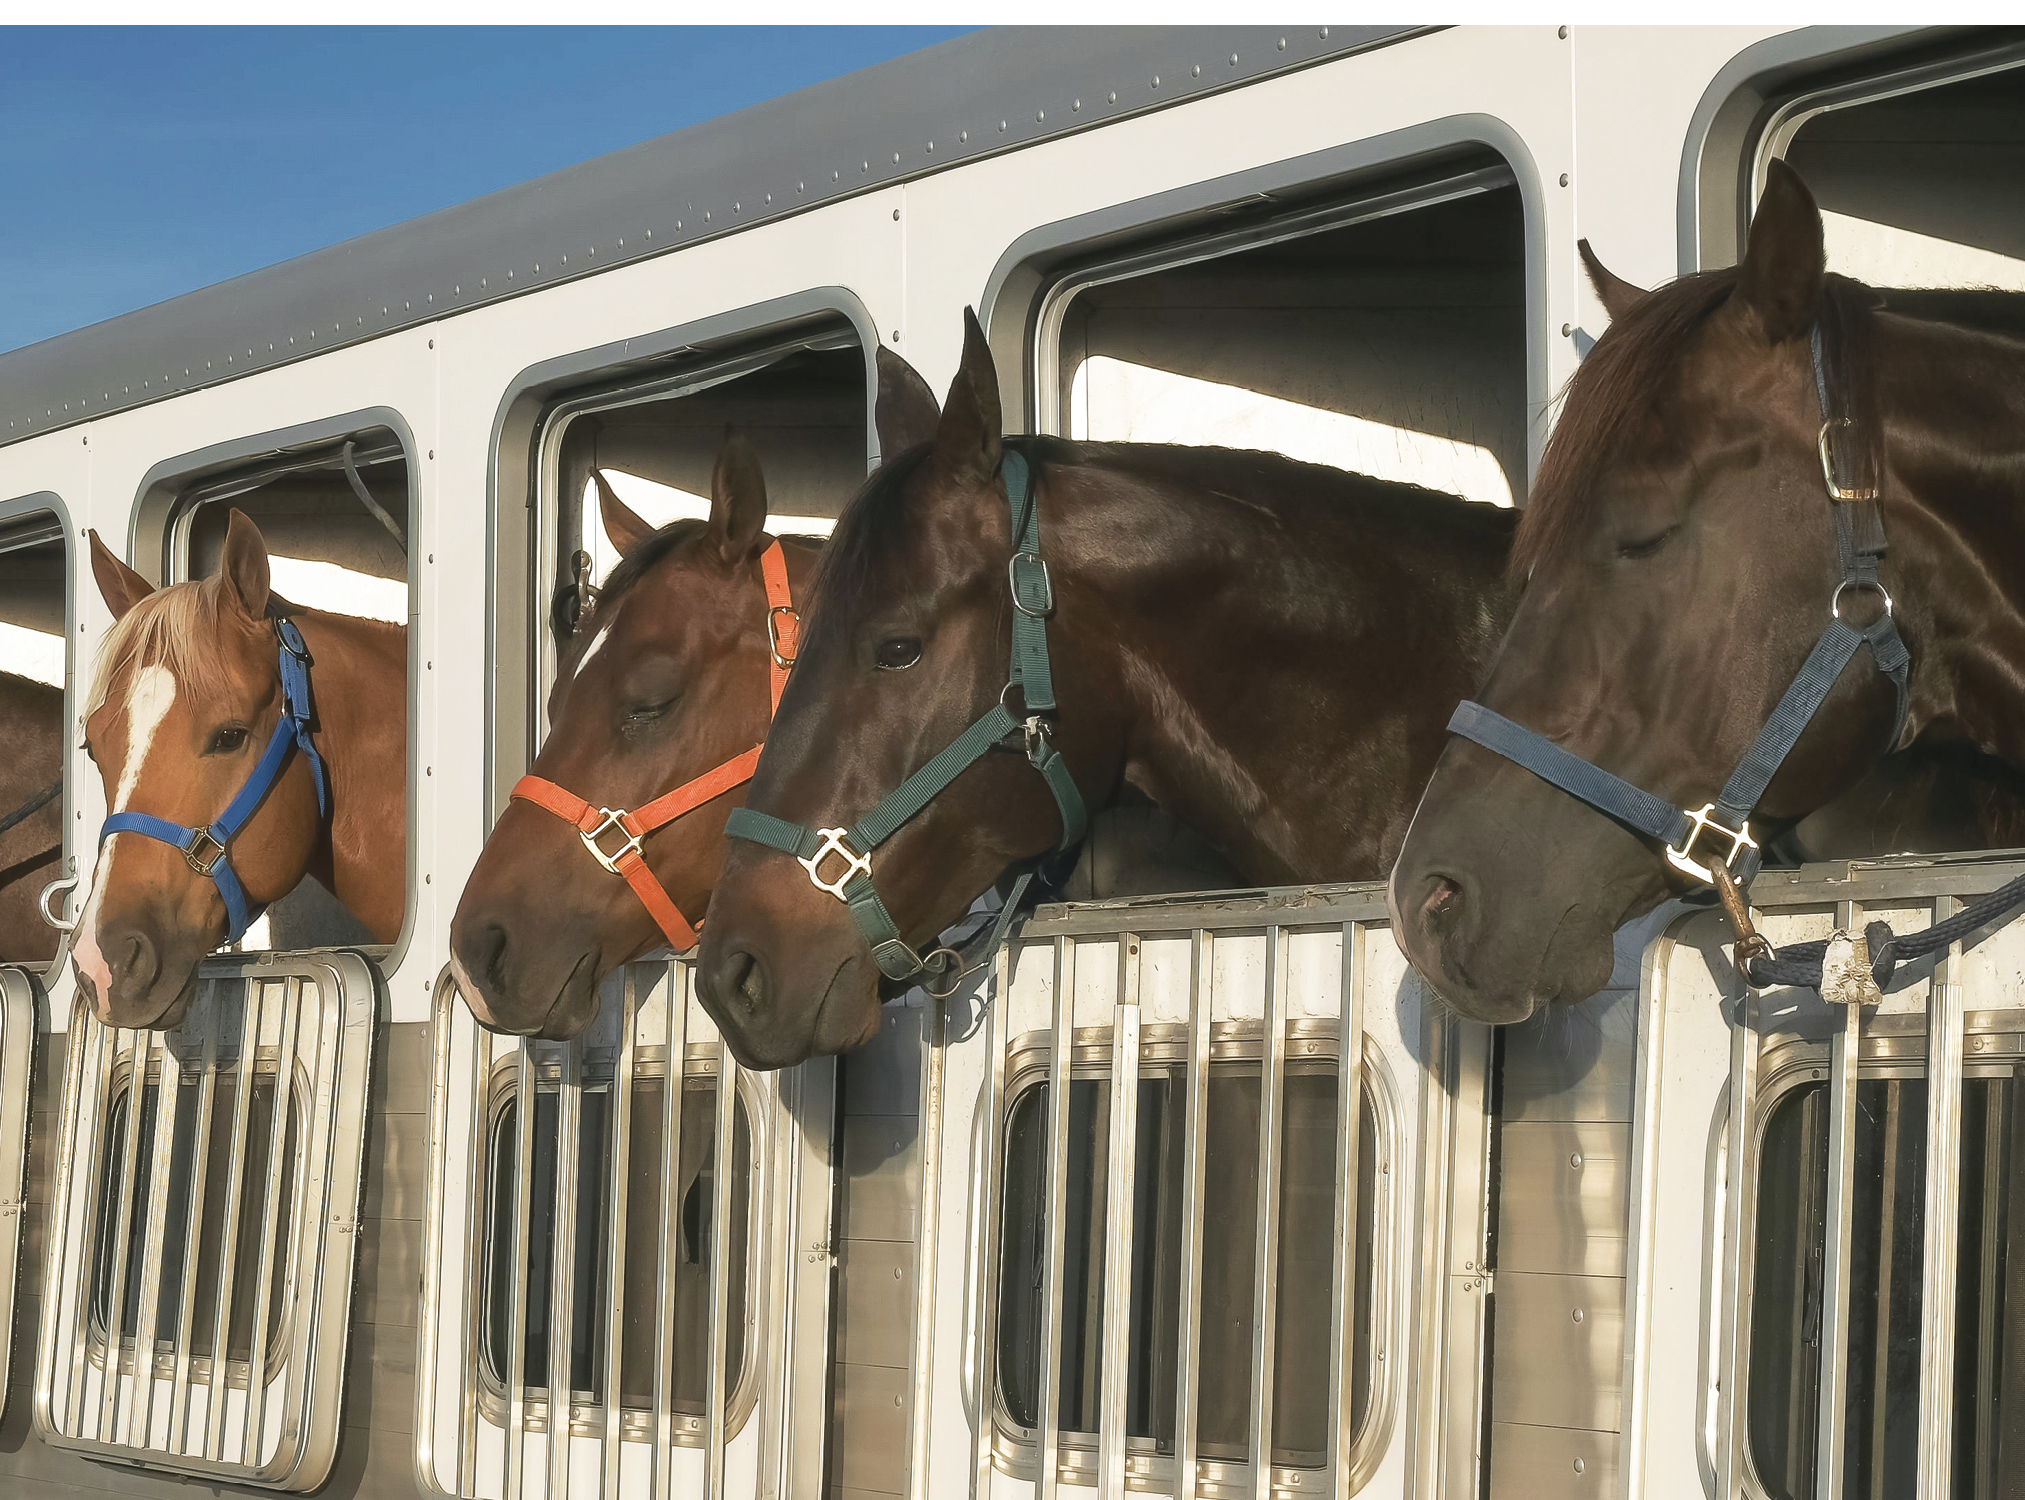 Equine travel continues to grow each year. Horse travel papers help eradicate diseases. 